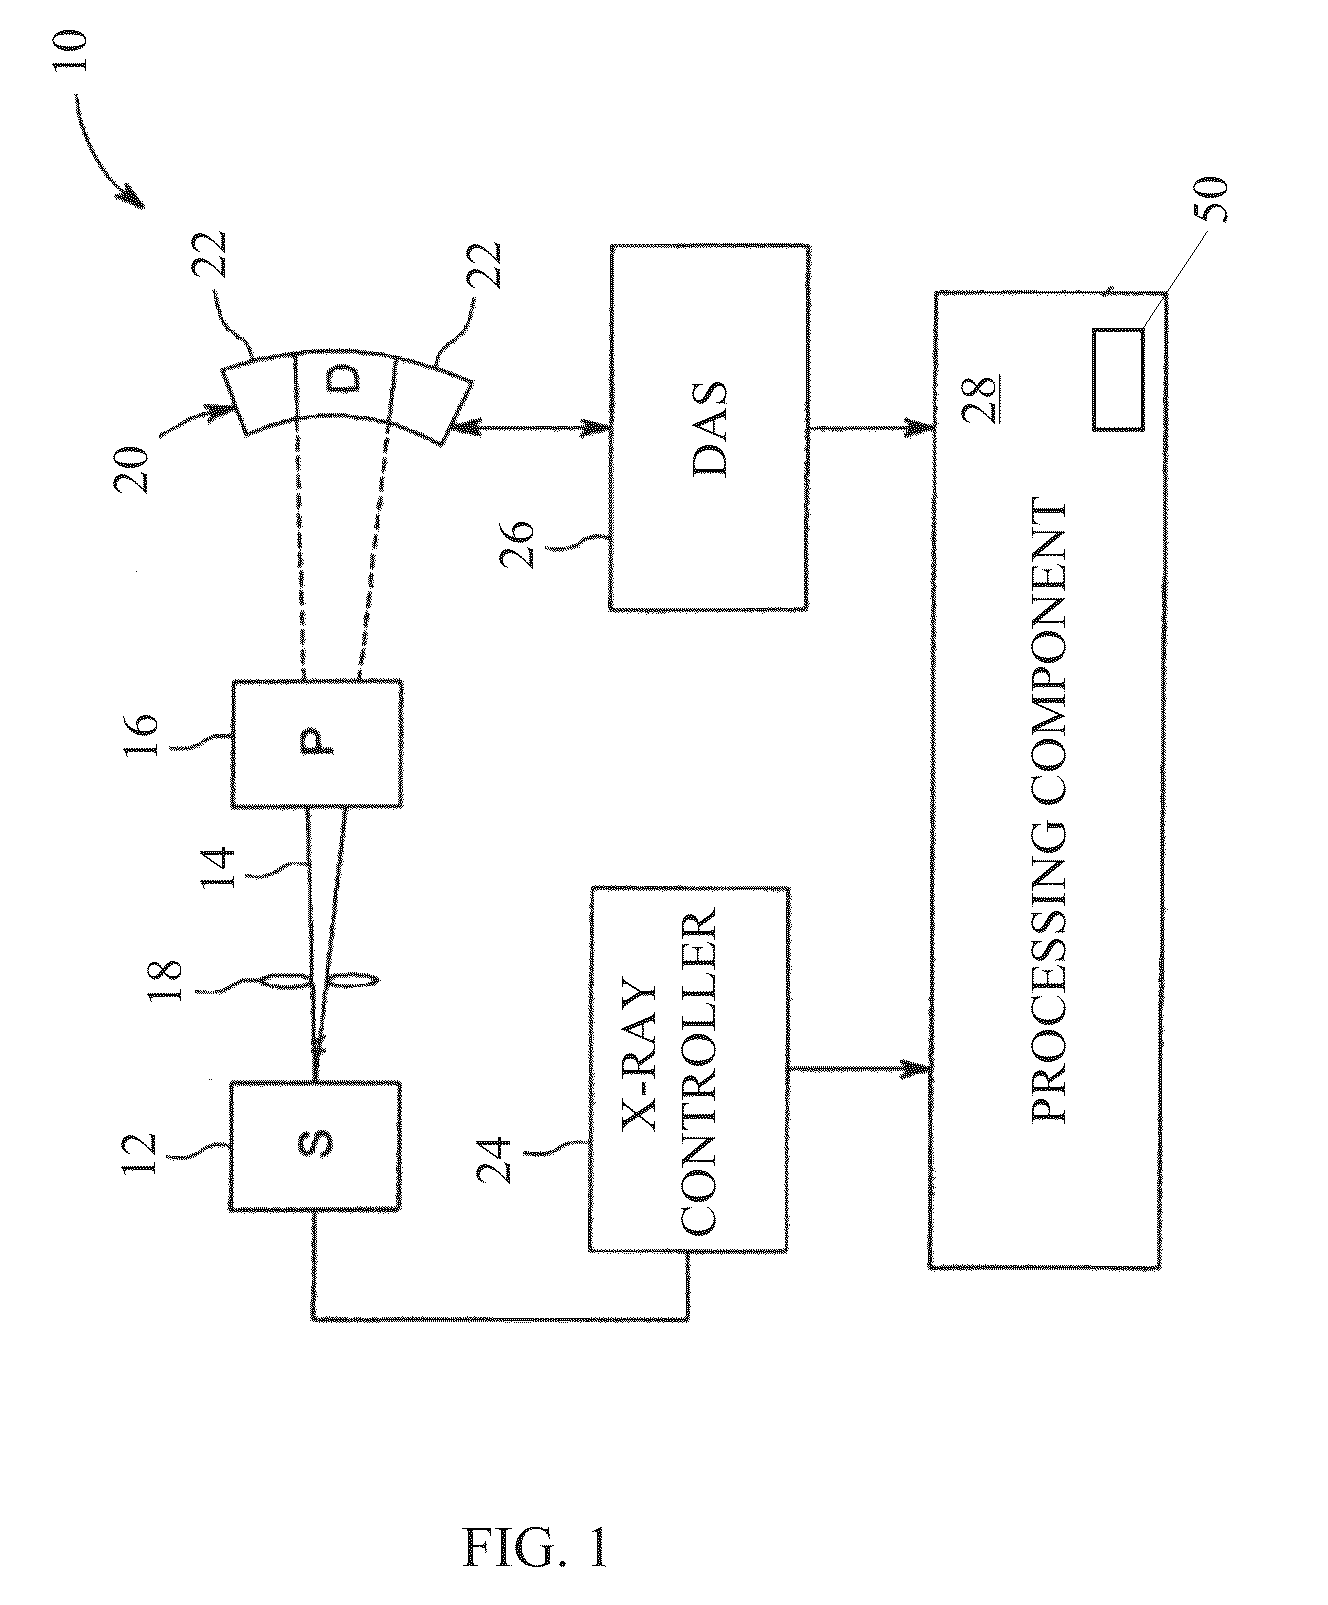 Systems and methods for performing segmentation and visualization of images